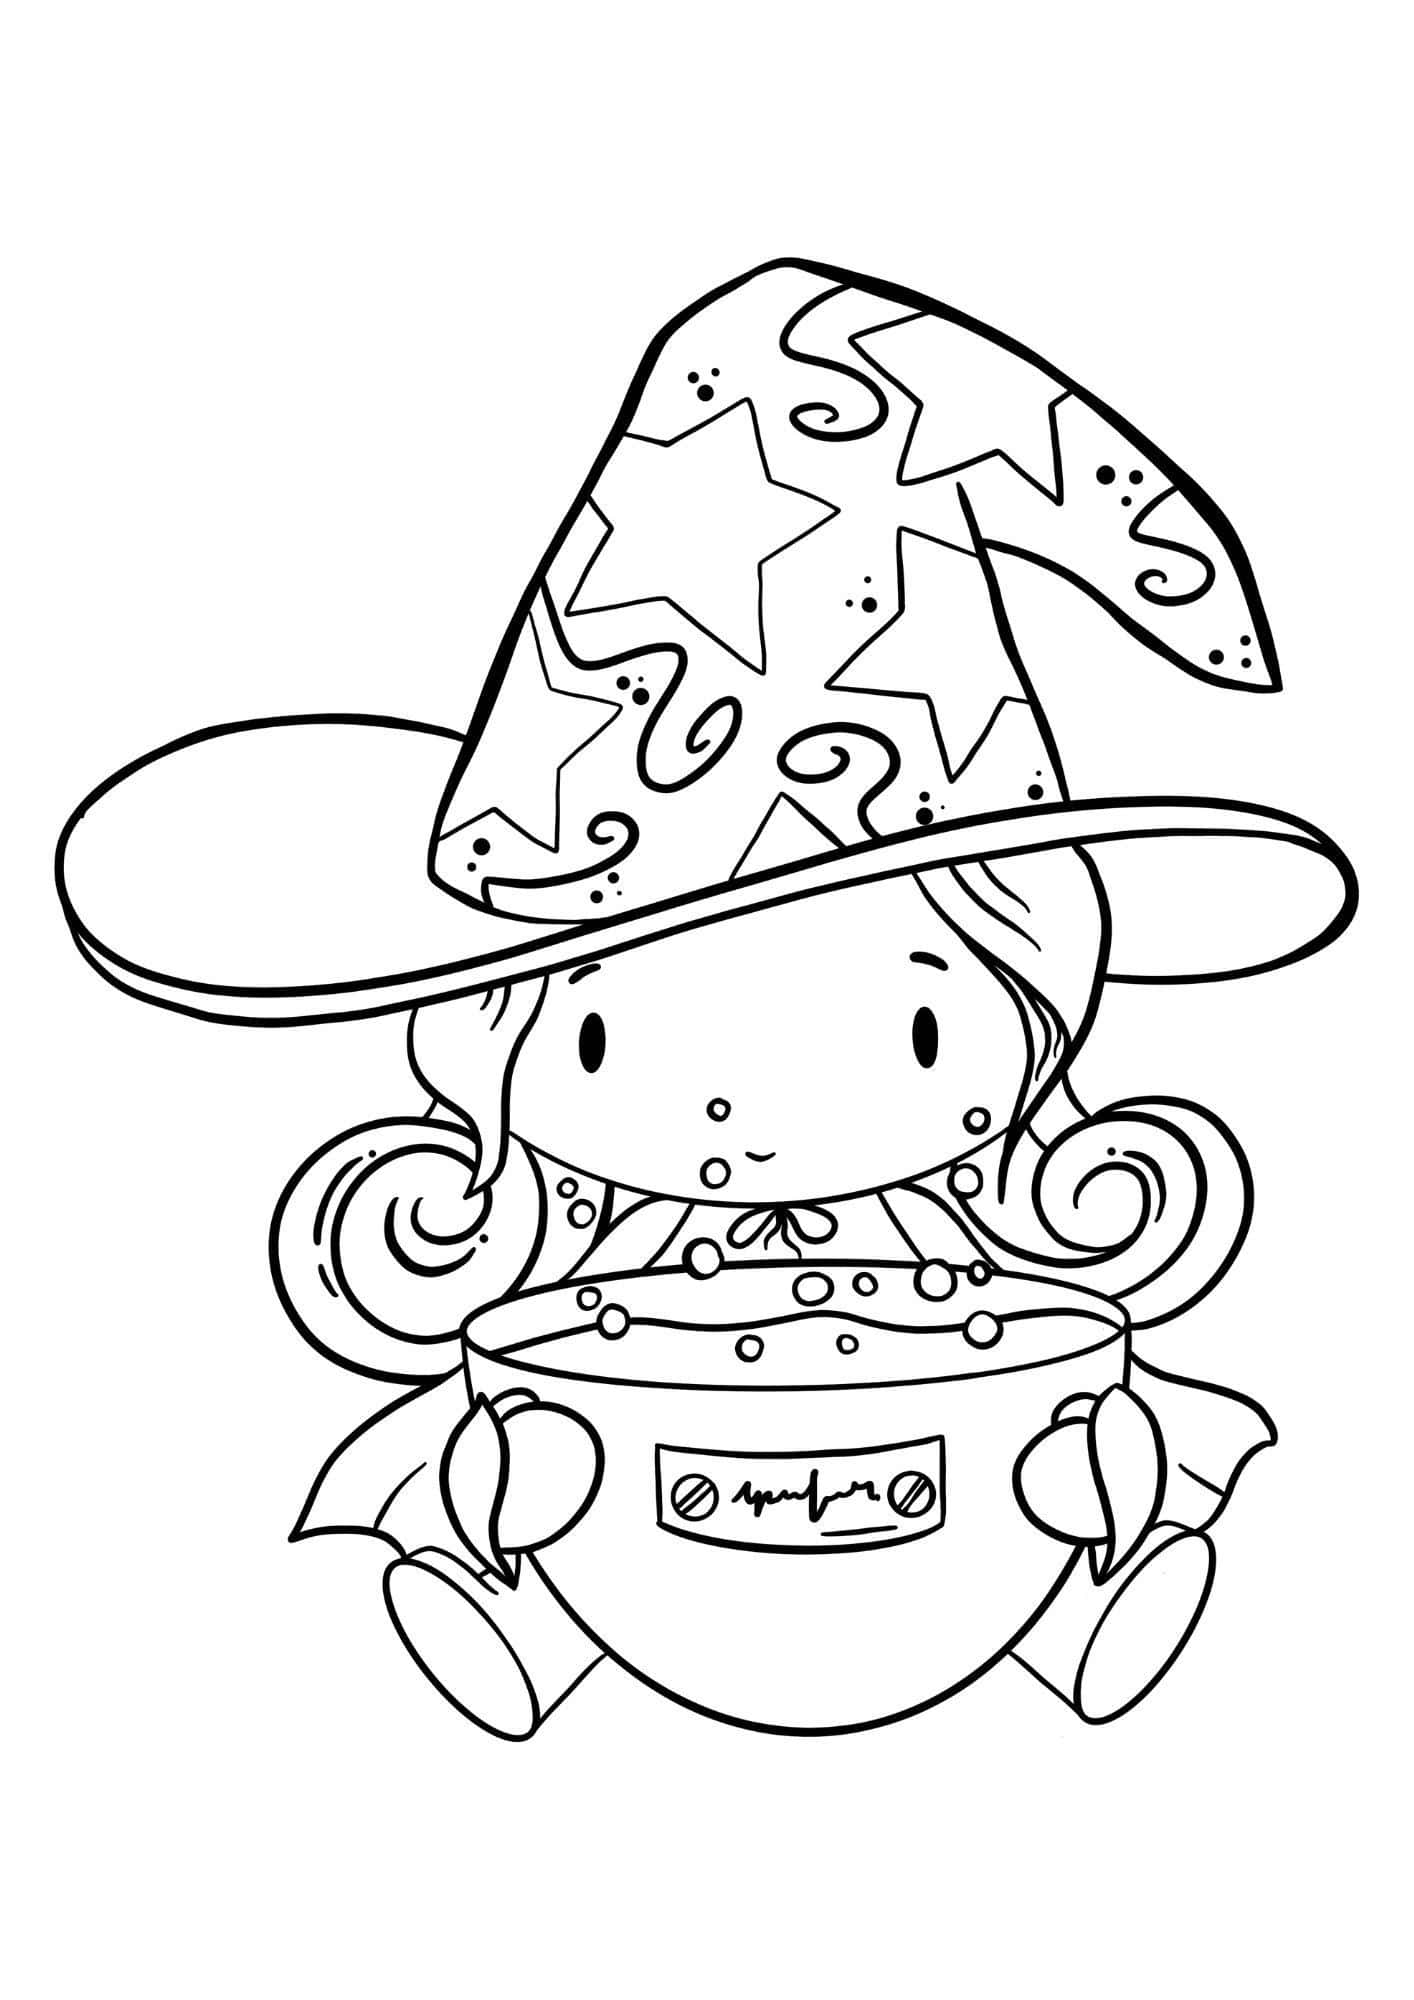 Captivating witch coloring pages for kids and adults